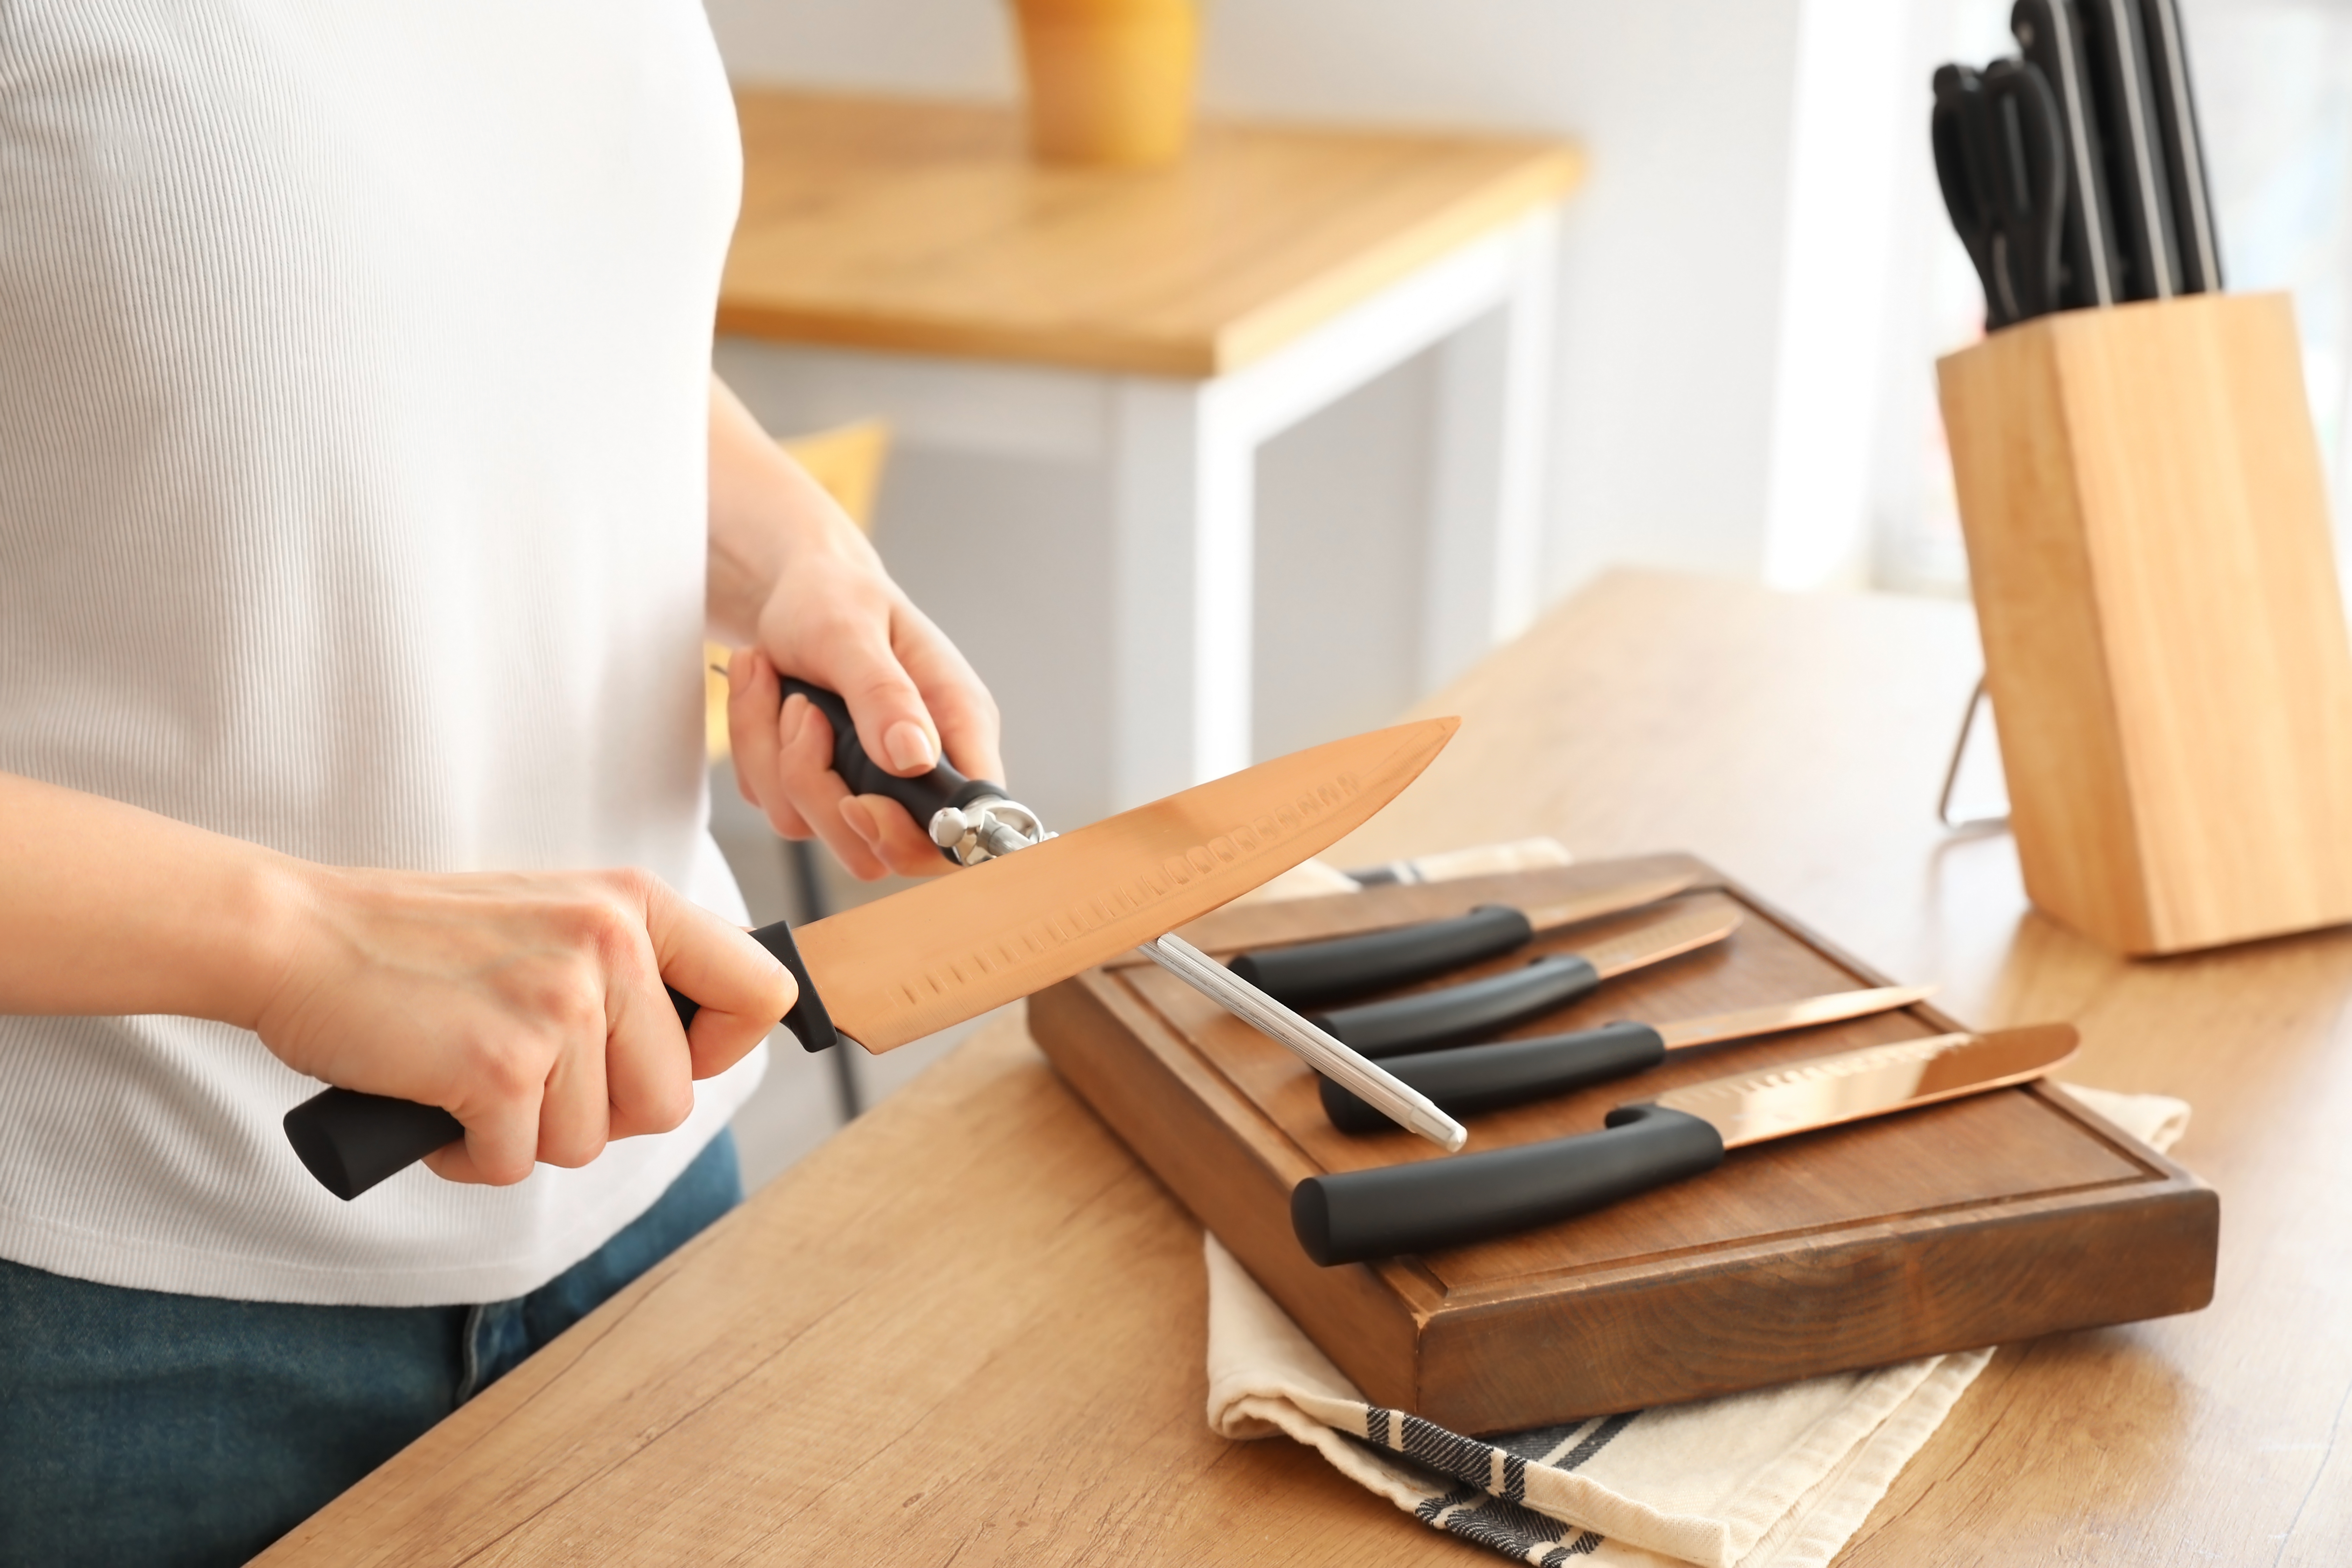 Kitchen Knife Buyers Guide: How To Choose The Best Knife Set For You 